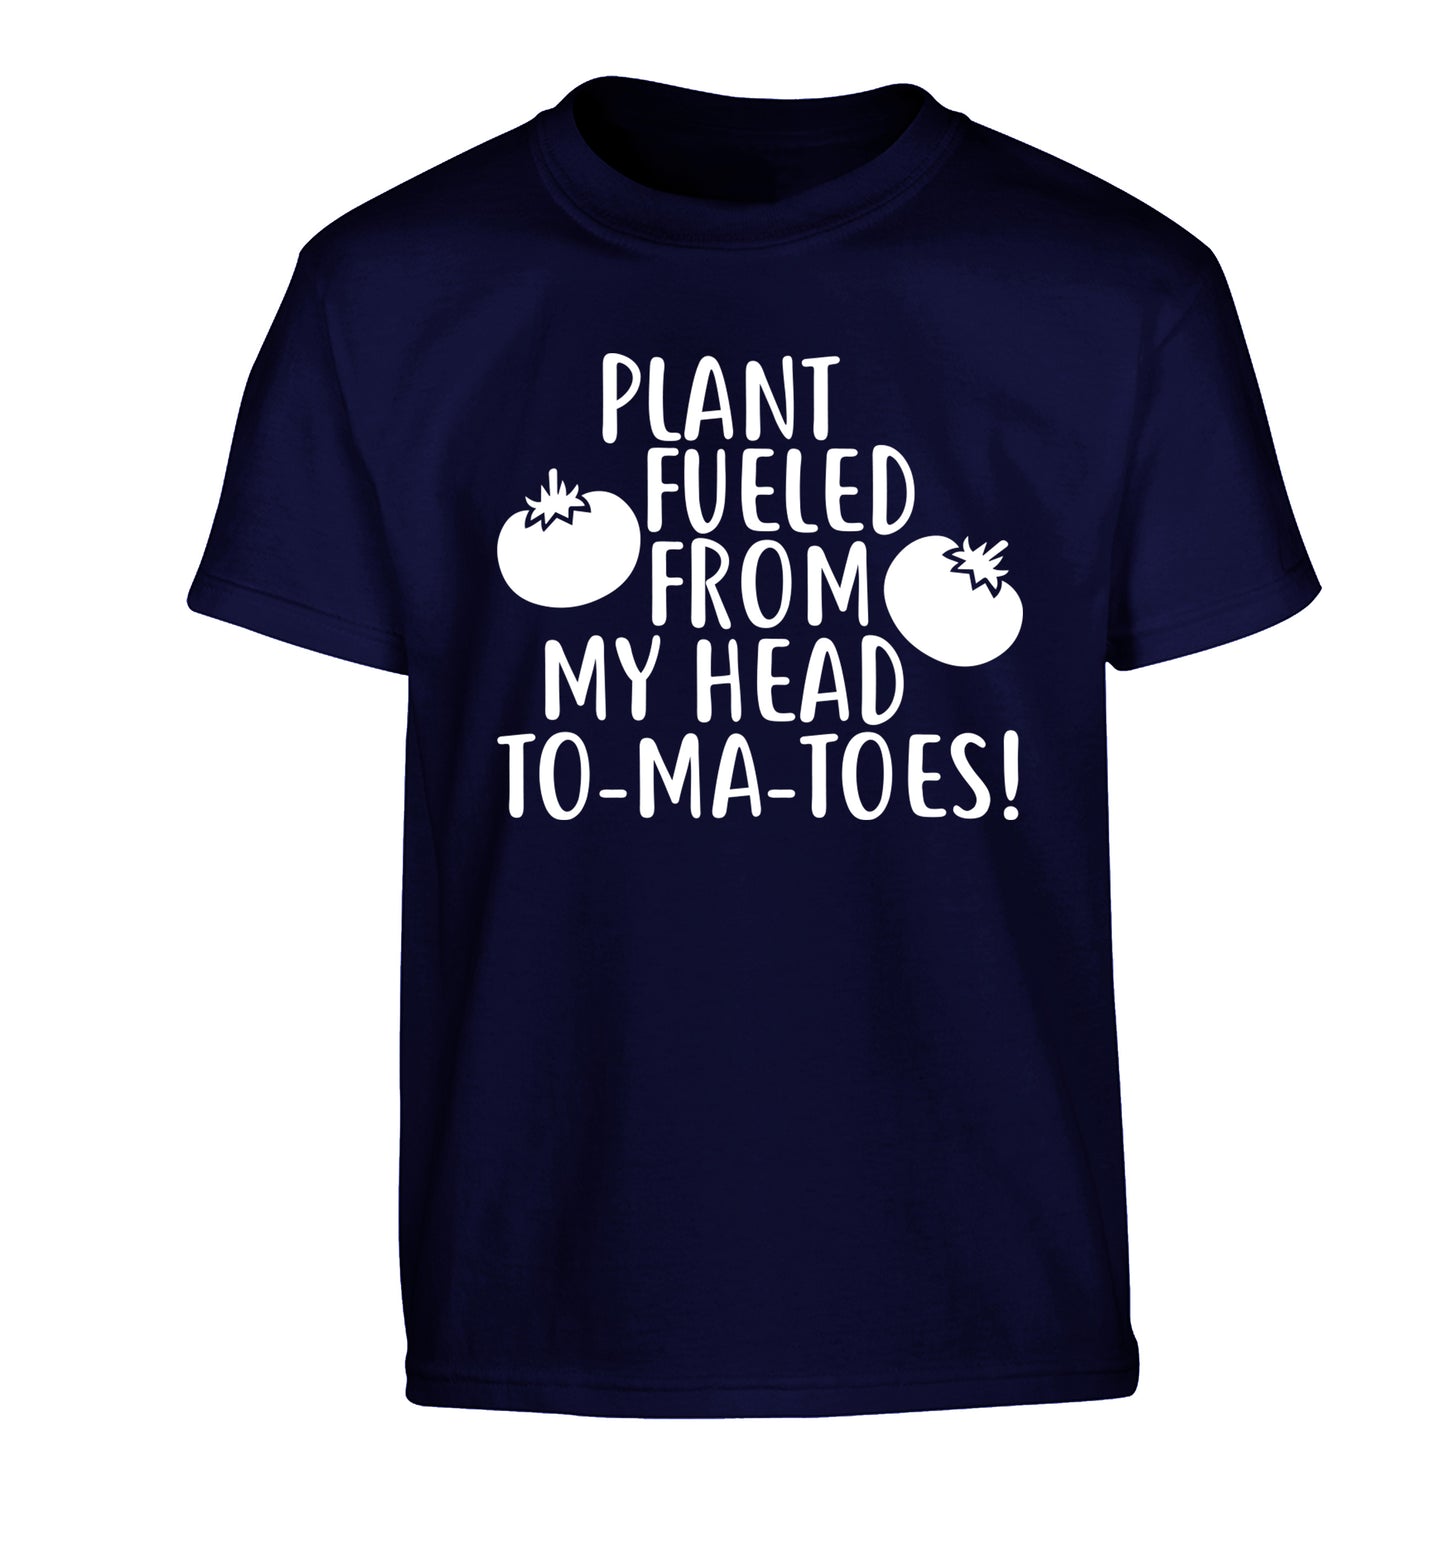 Plant fueled from my head to-ma-toes Children's navy Tshirt 12-14 Years